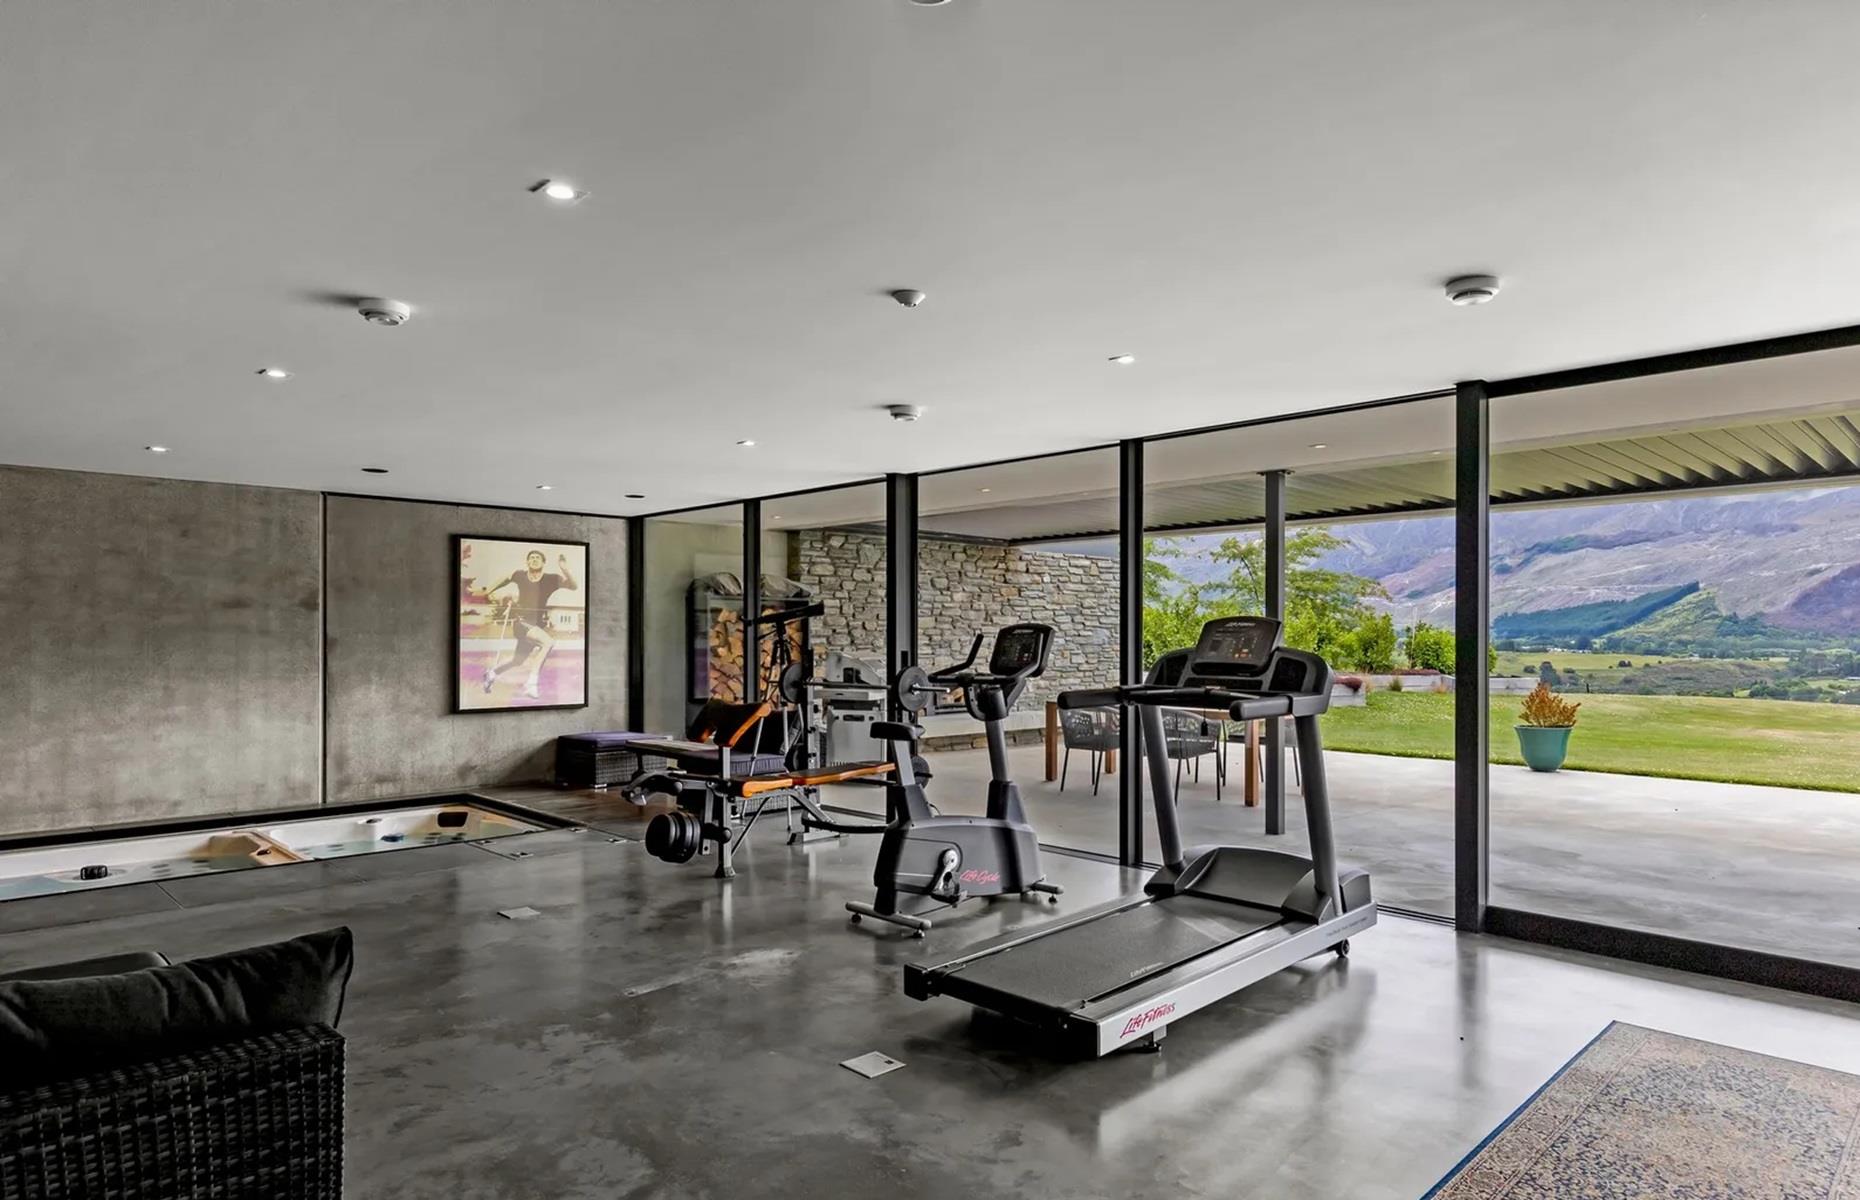 <p>Below the master bedroom is an awesome gym, kitted out with an indoor “endless” swimming pool, a spa and a sauna. The space opens to an outdoor entertaining area, so the lucky owner can take their workouts alfresco. If you've fallen in love, then the property is for sale right now for an undisclosed sum.</p>